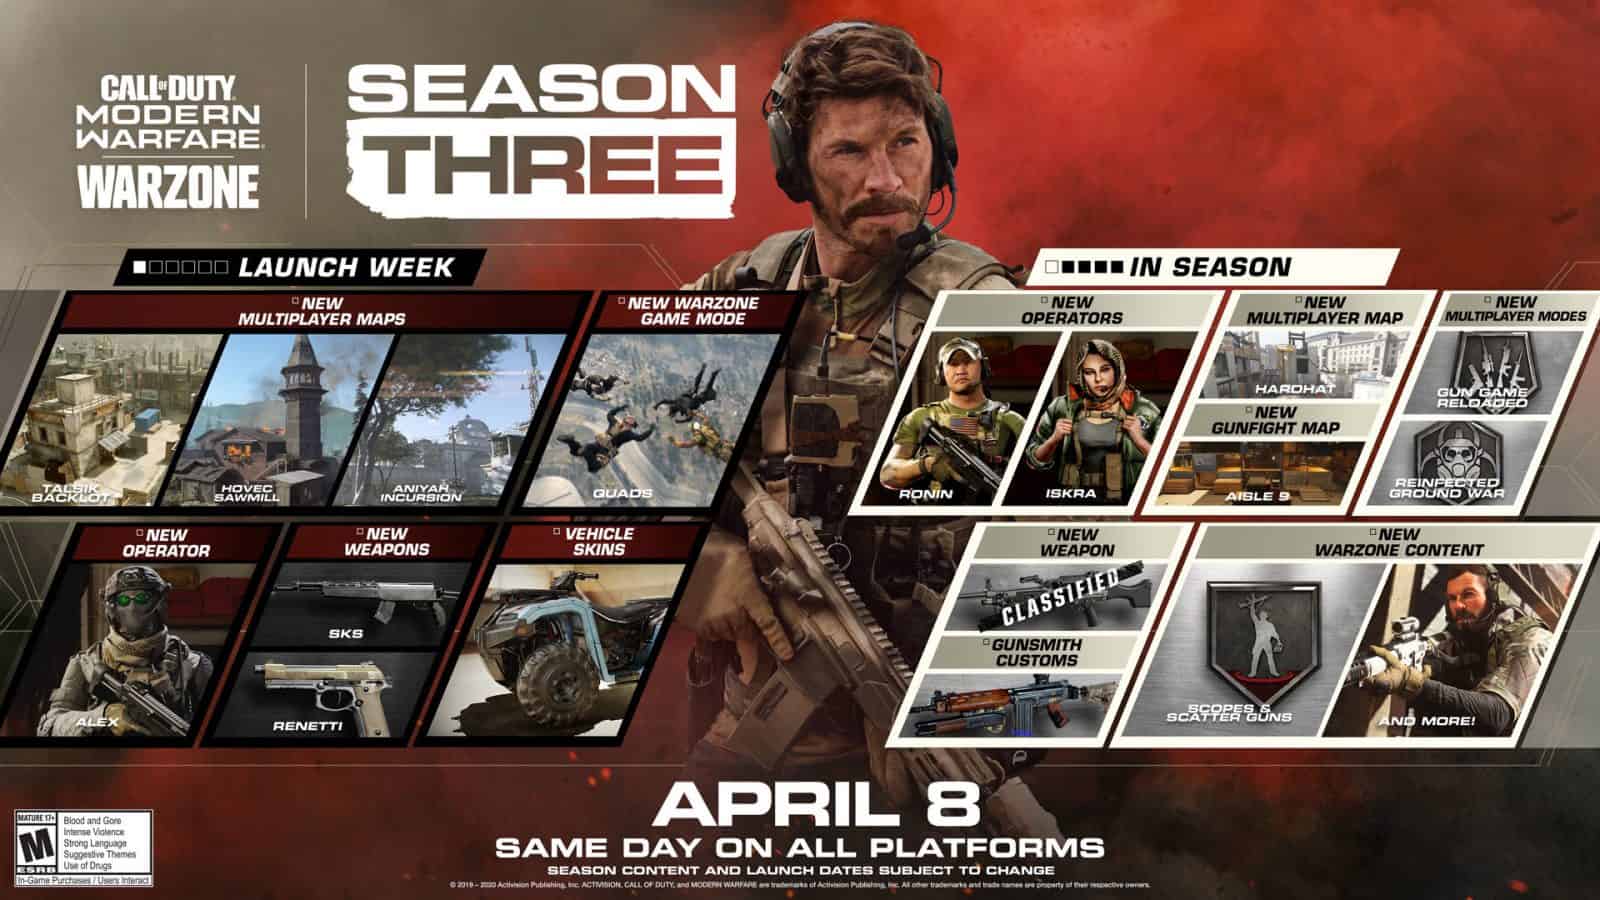 Call of Duty: Warzone Season 3 is Live